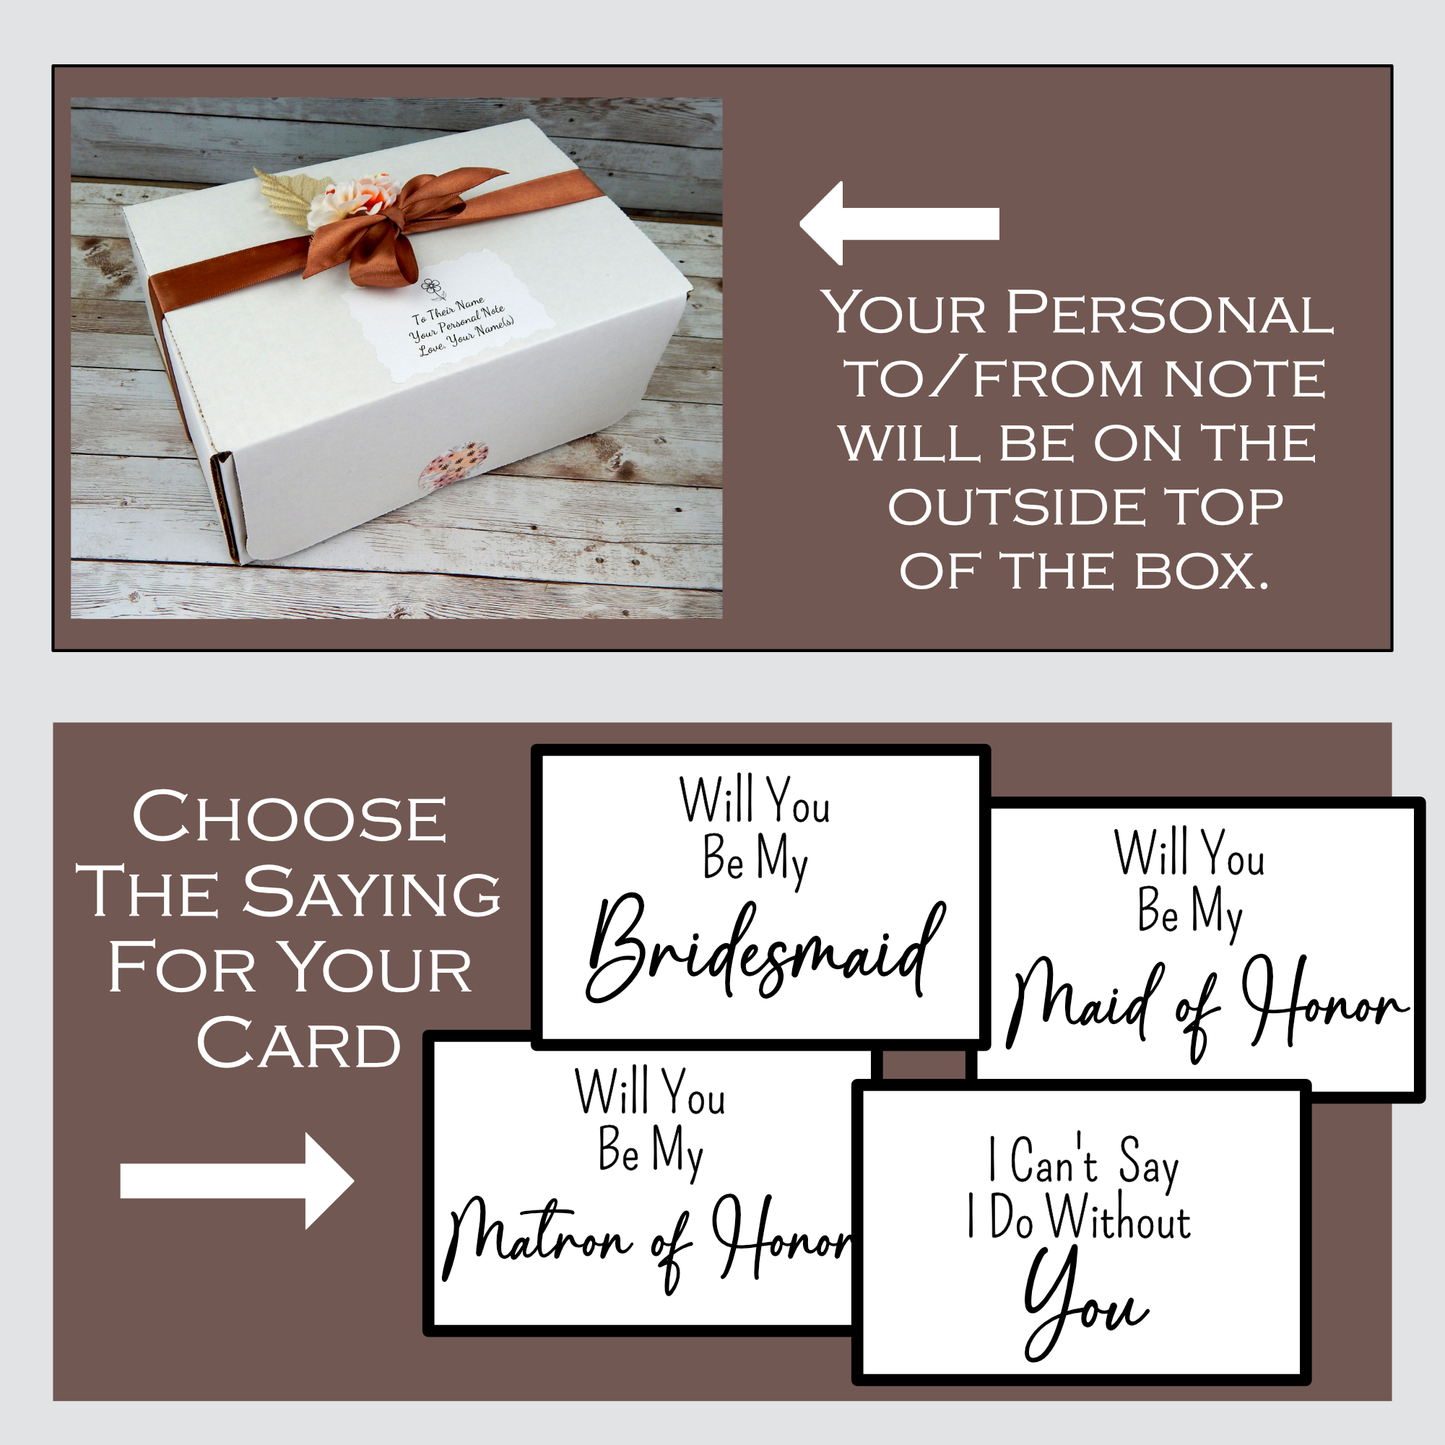 Bridesmaid Proposal Gift for Bridal Party and Maid of Honor